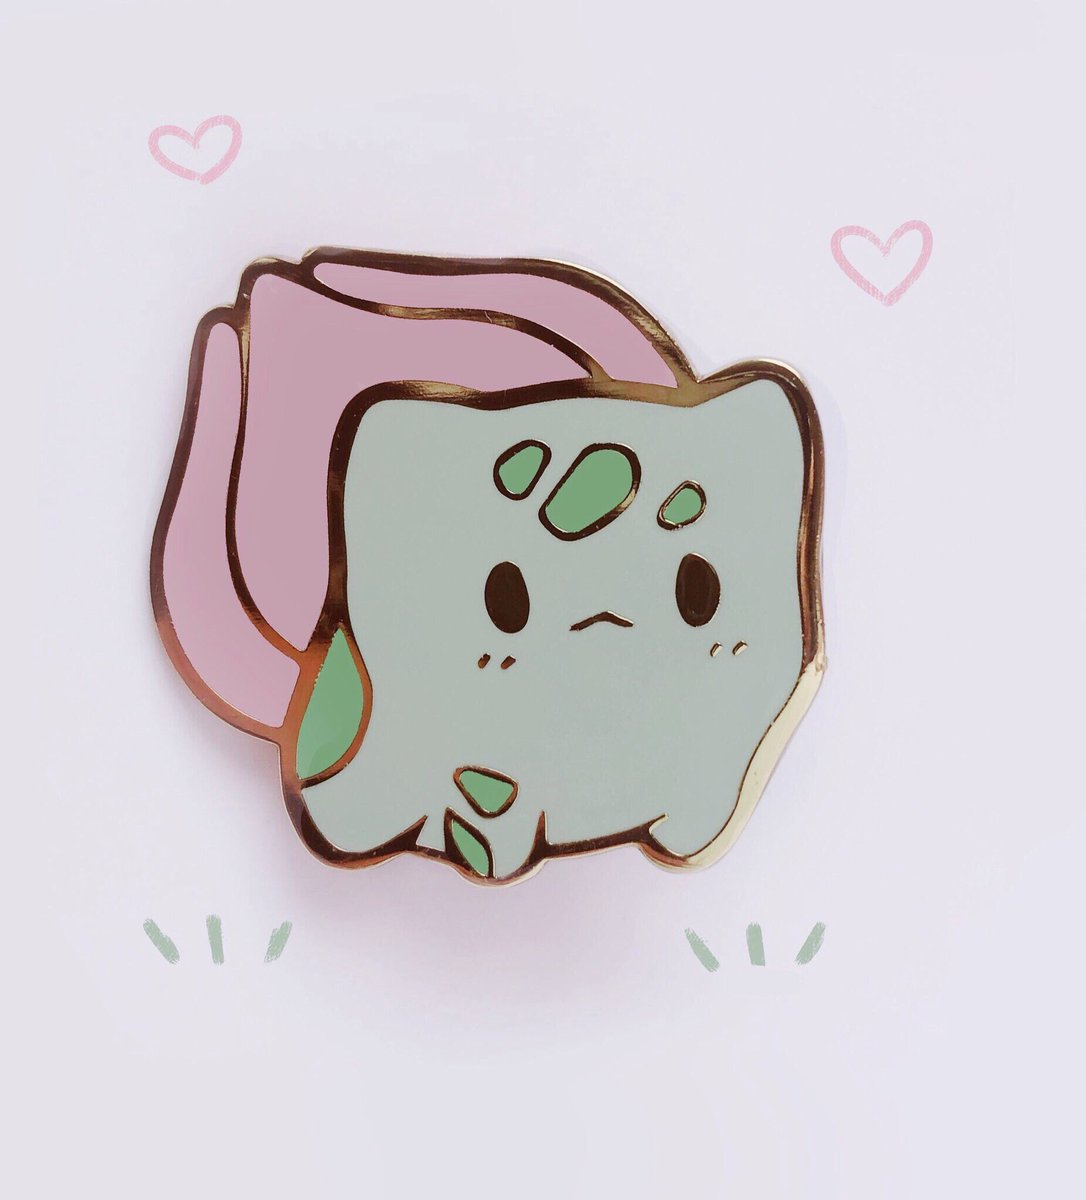 I was not expecting this to take off but hi I’m an artist and I make things !!   http://ciaraturnerart.com  (currently on hiatus but will be back for new 2020 merch!... including Kirby!!!!!)